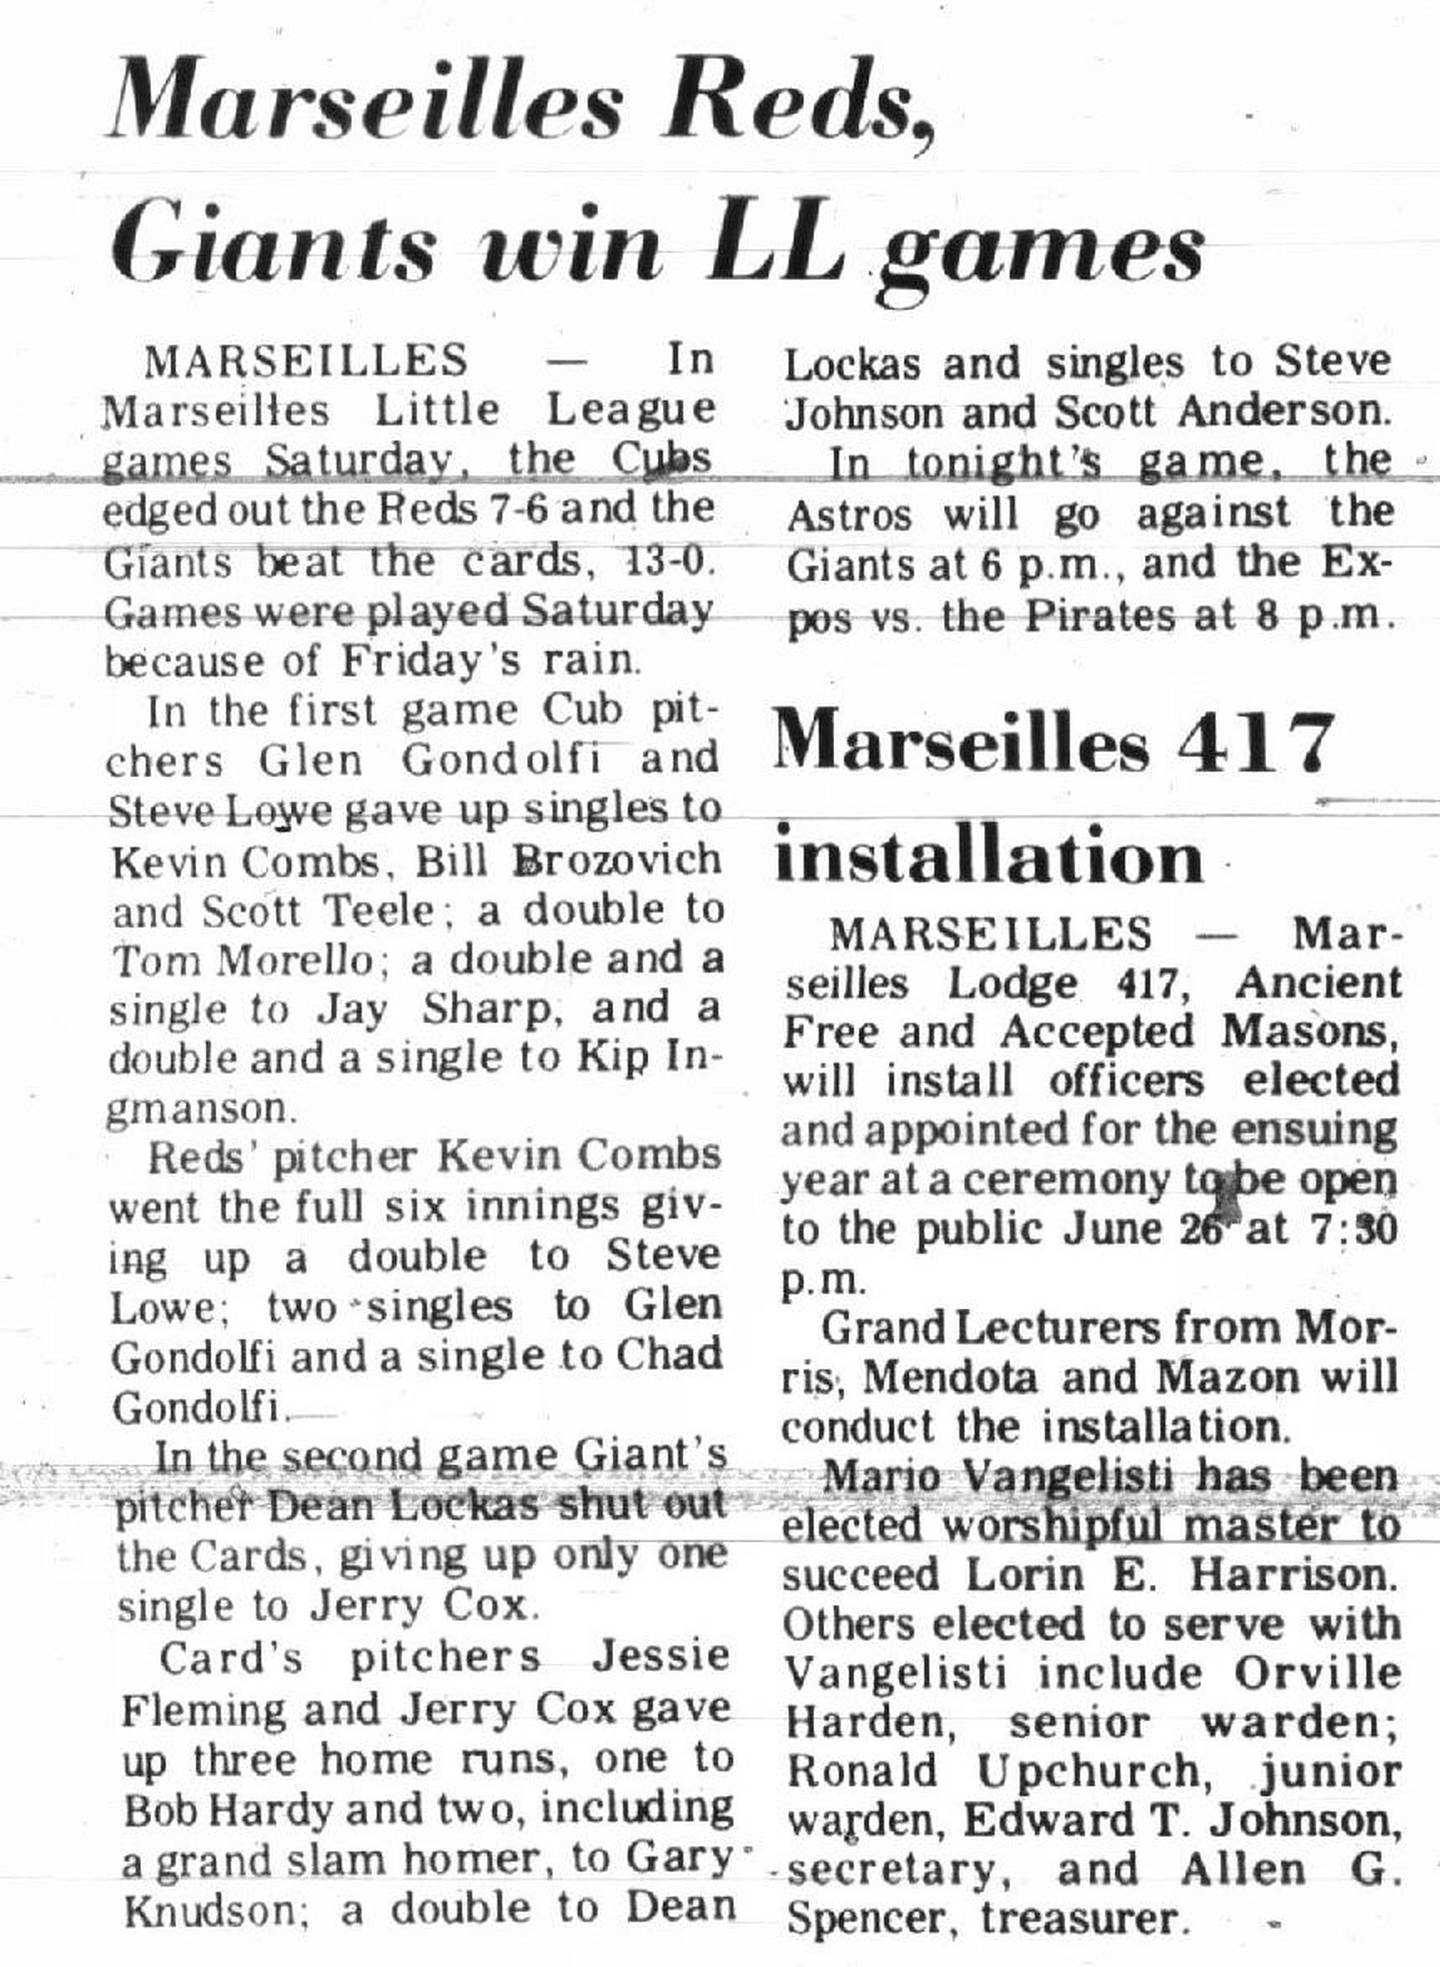 Rage Against the Machine guitarist Tom Morello played Little League baseball in Marseilles. He recalls those memories often when he talks about his connection with the community. Here is an old newspaper clip from one of his games.